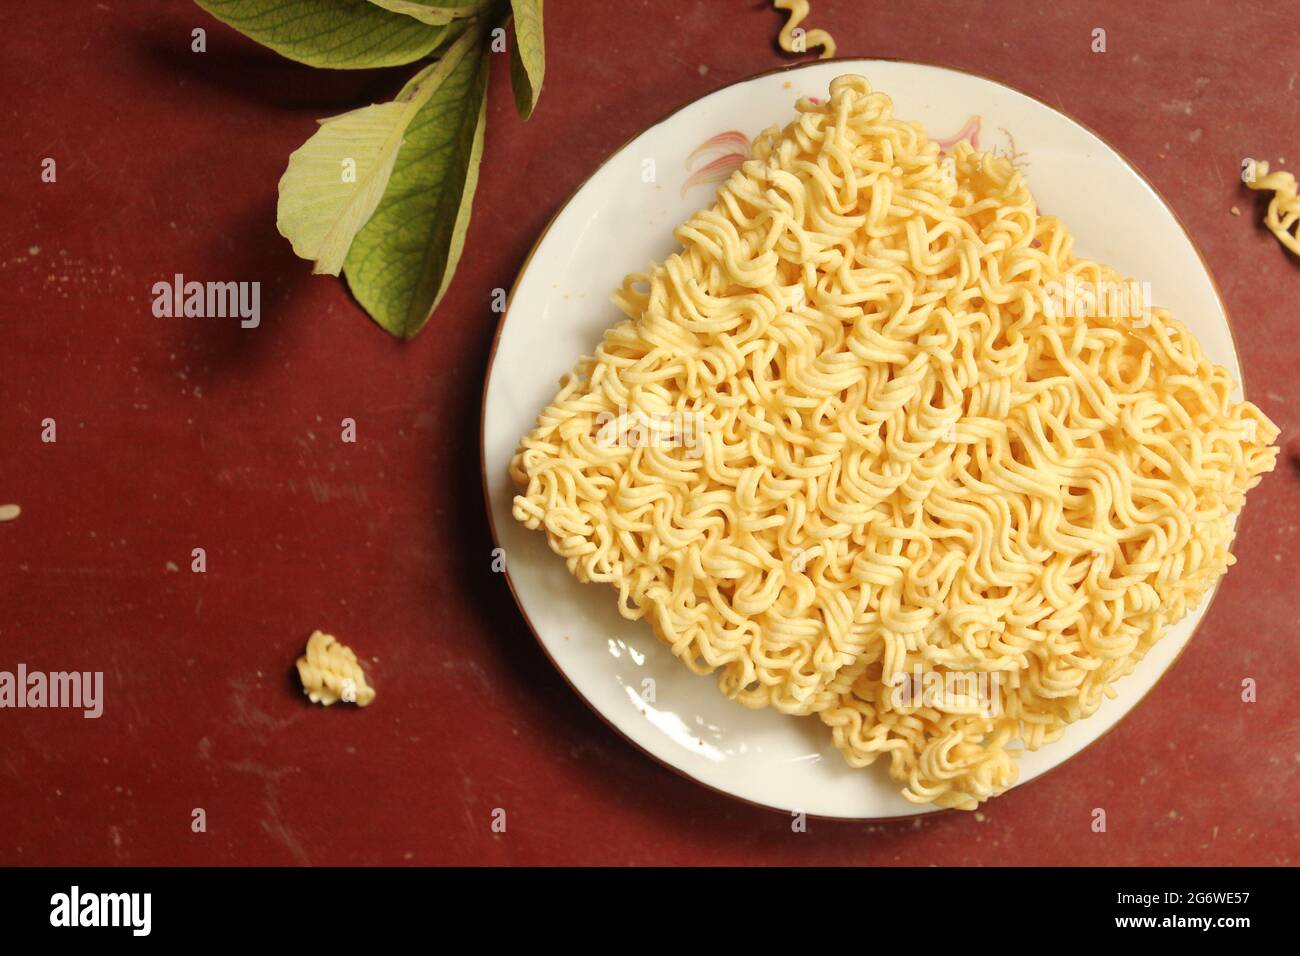 Uncooked noodles food on plate, top view Stock Photo